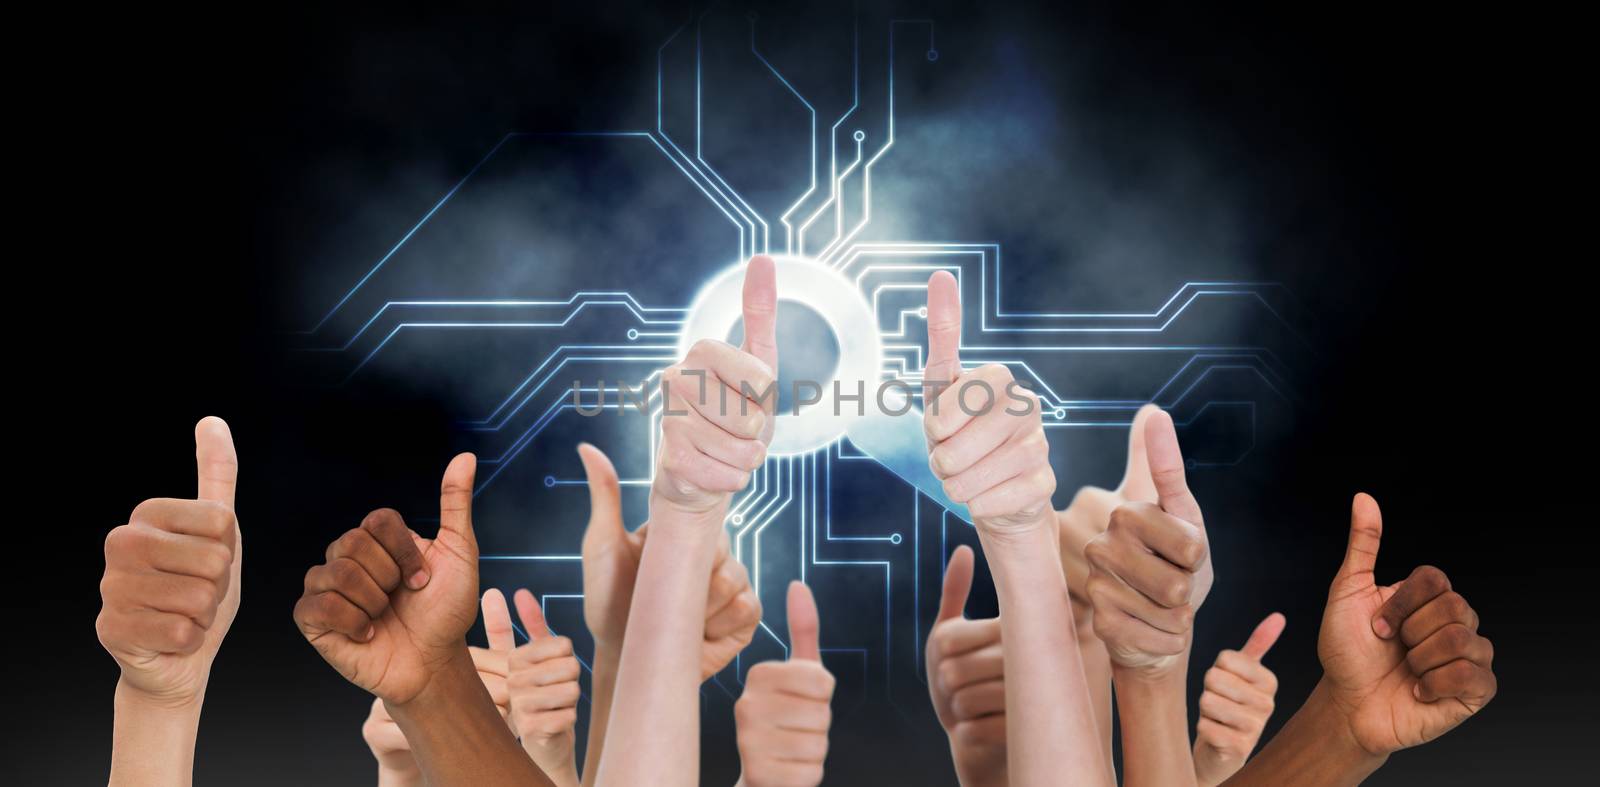 Hands showing thumbs up against circuit board and magnifying glass graphic